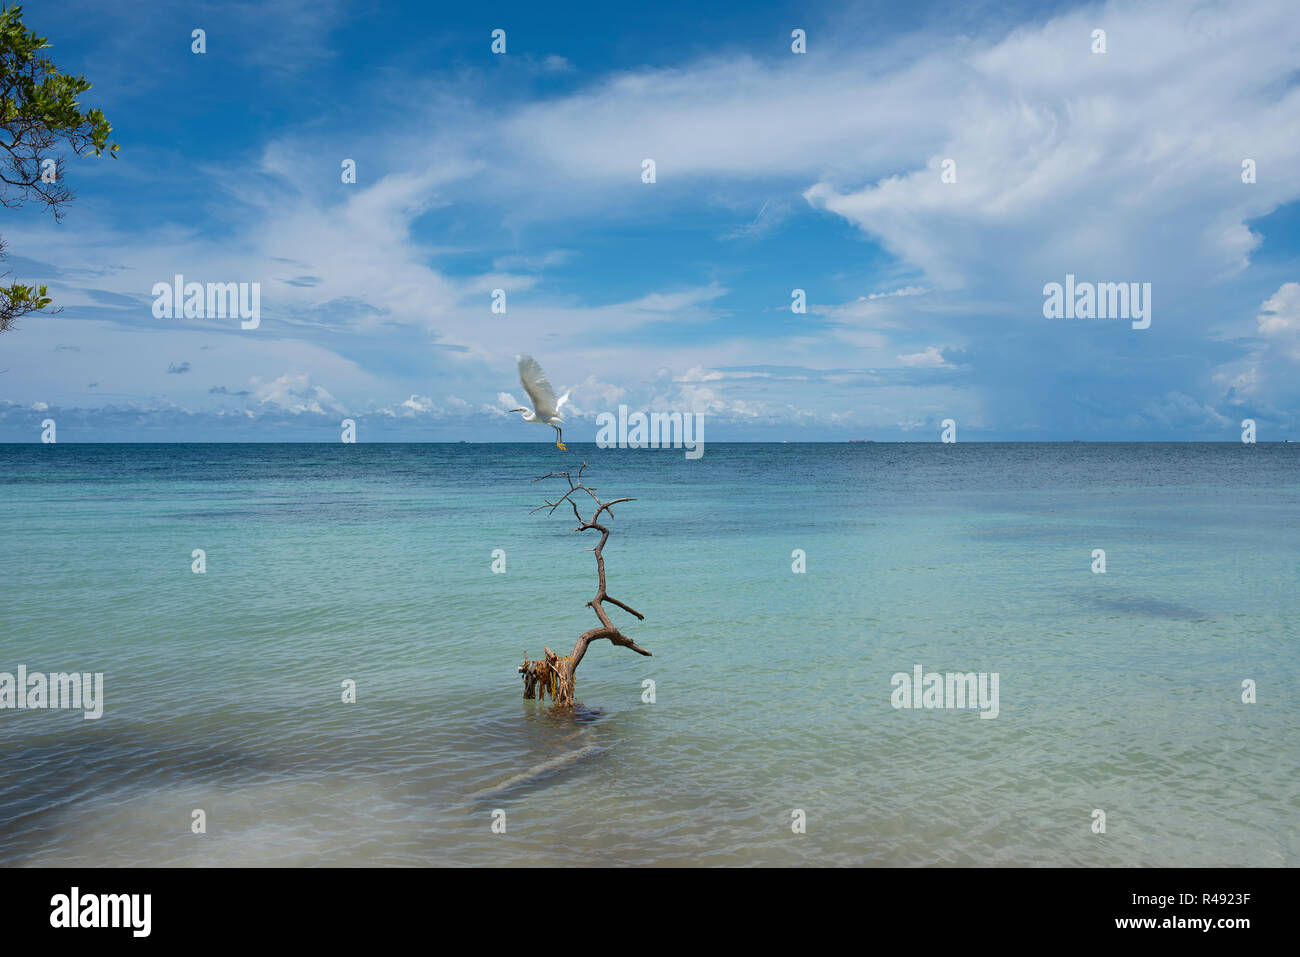 Great egret flying off a driftwood. The paradisiacal seascape of Playa Azul (Blue Beach) private island. Cartagena de Indias, Colombia Stock Photo